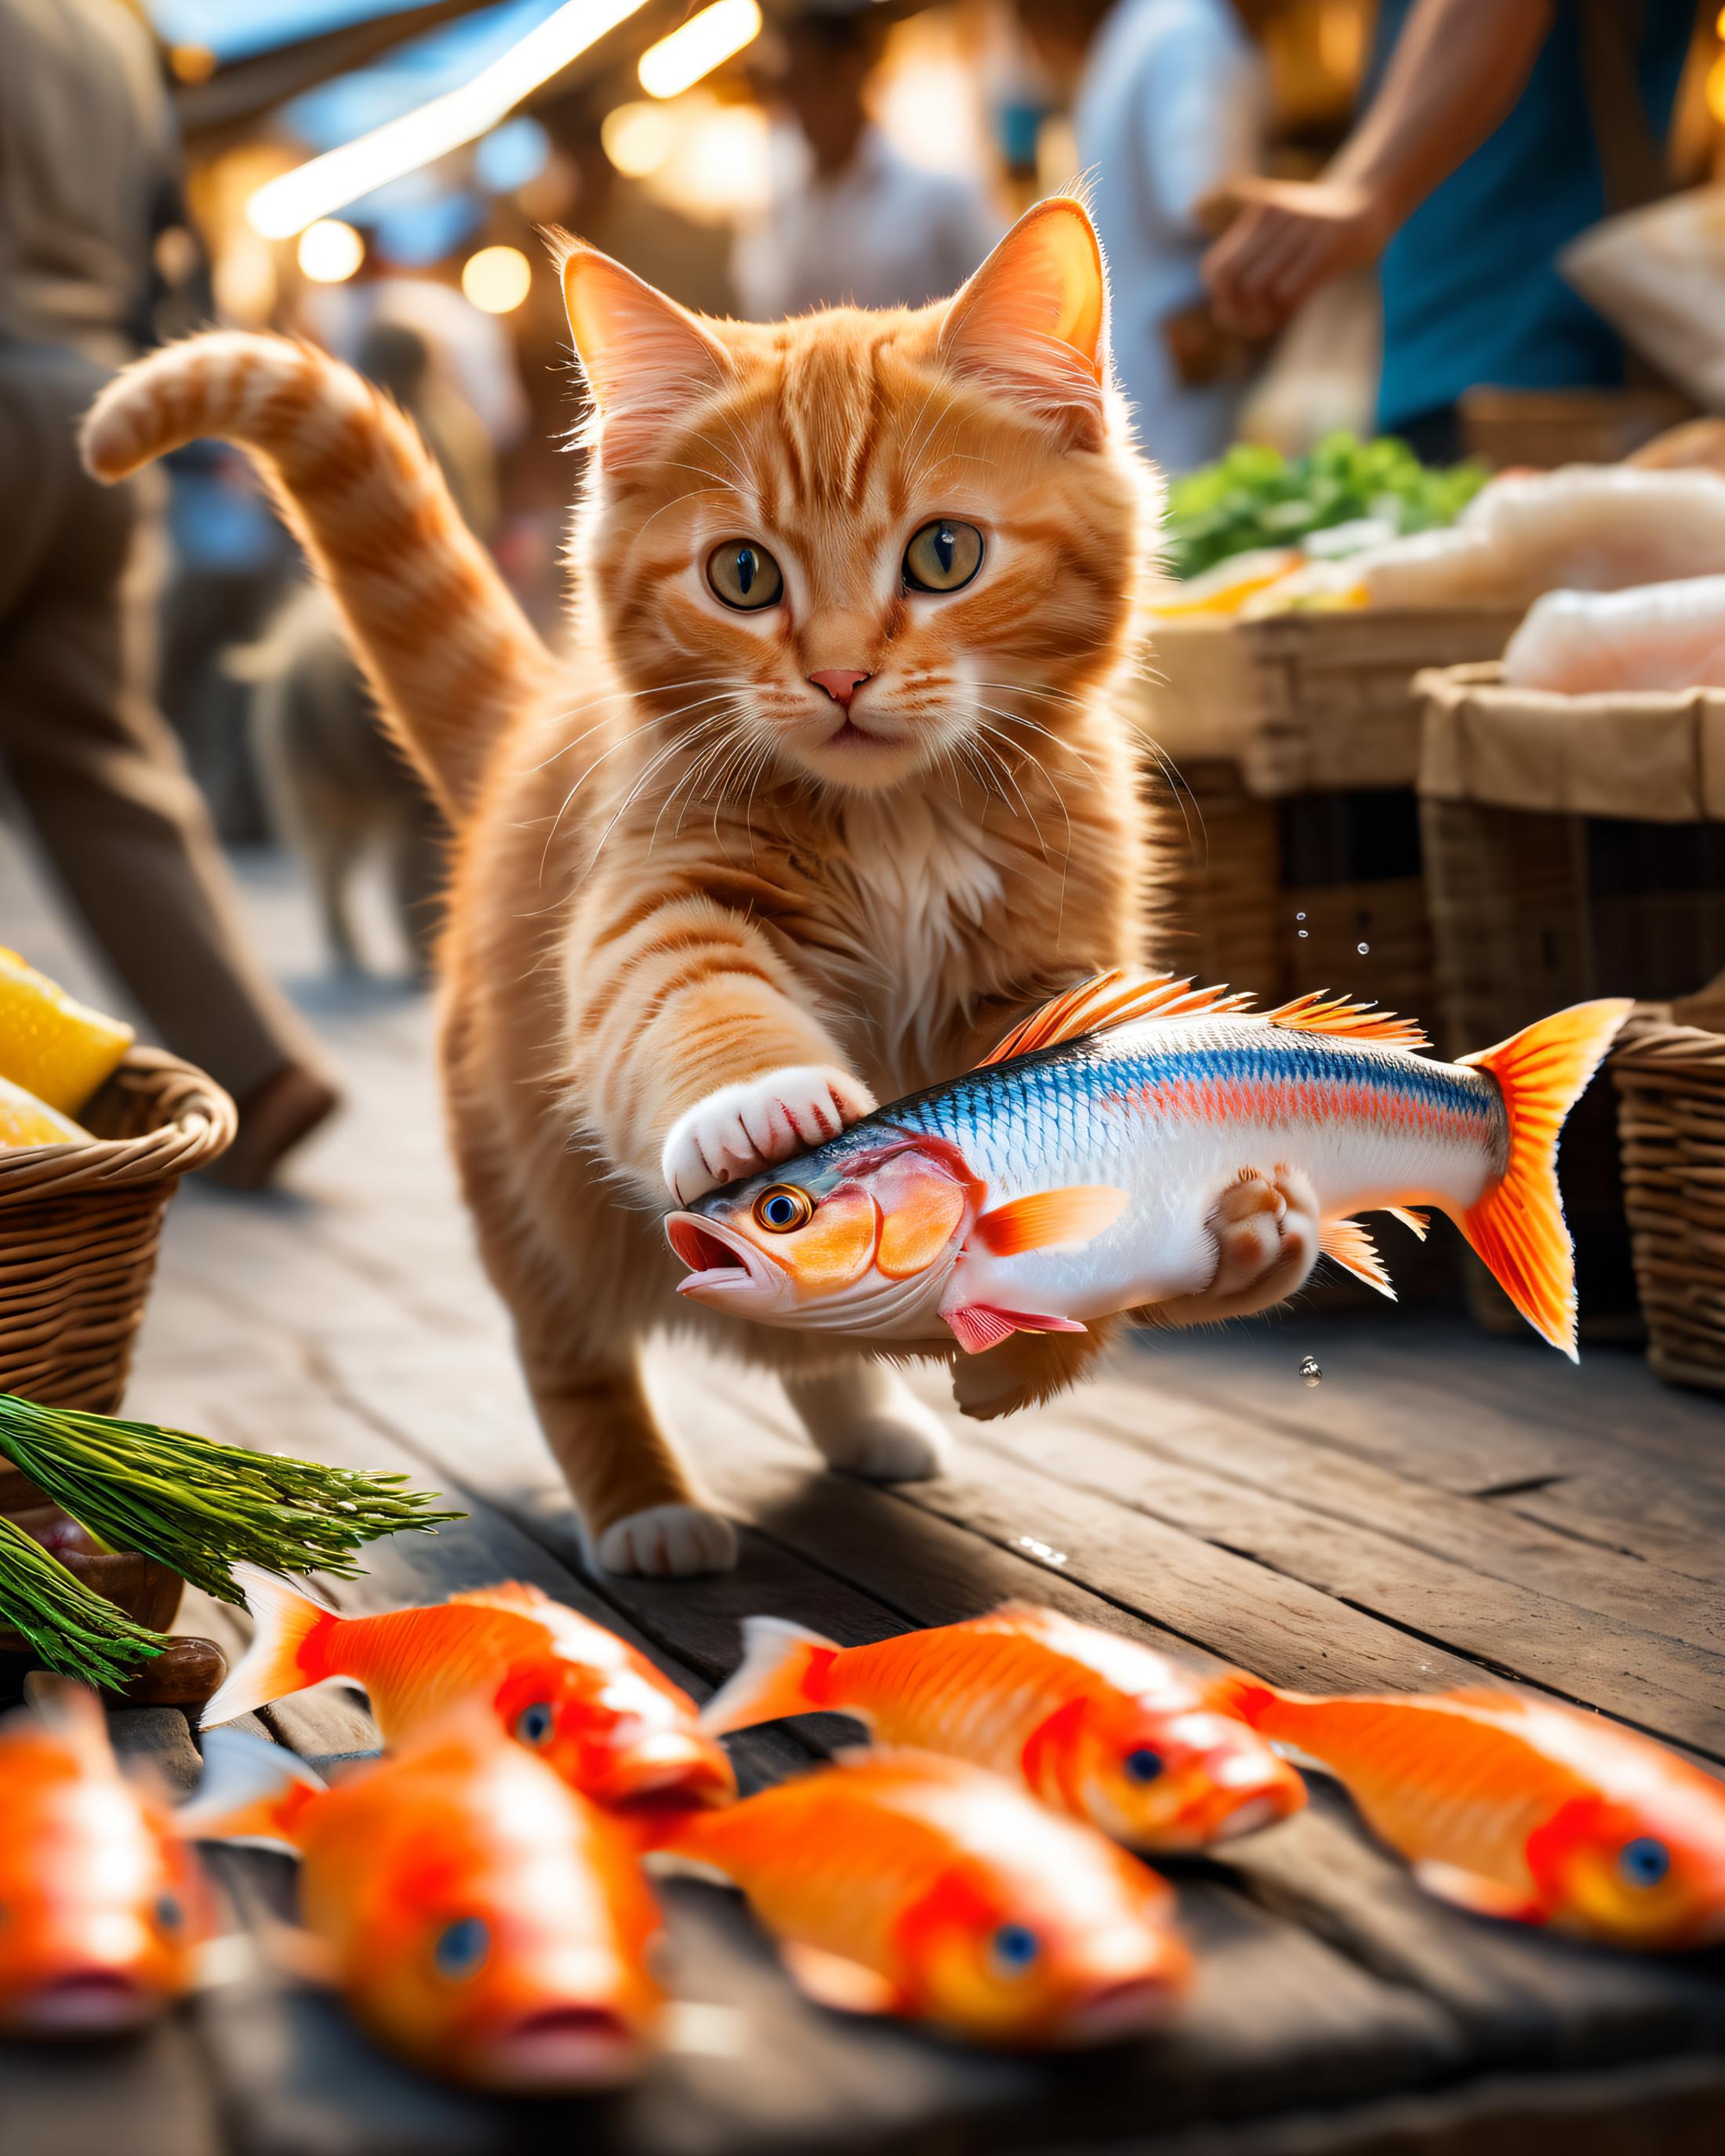 A cat is holding a fish in its paws.